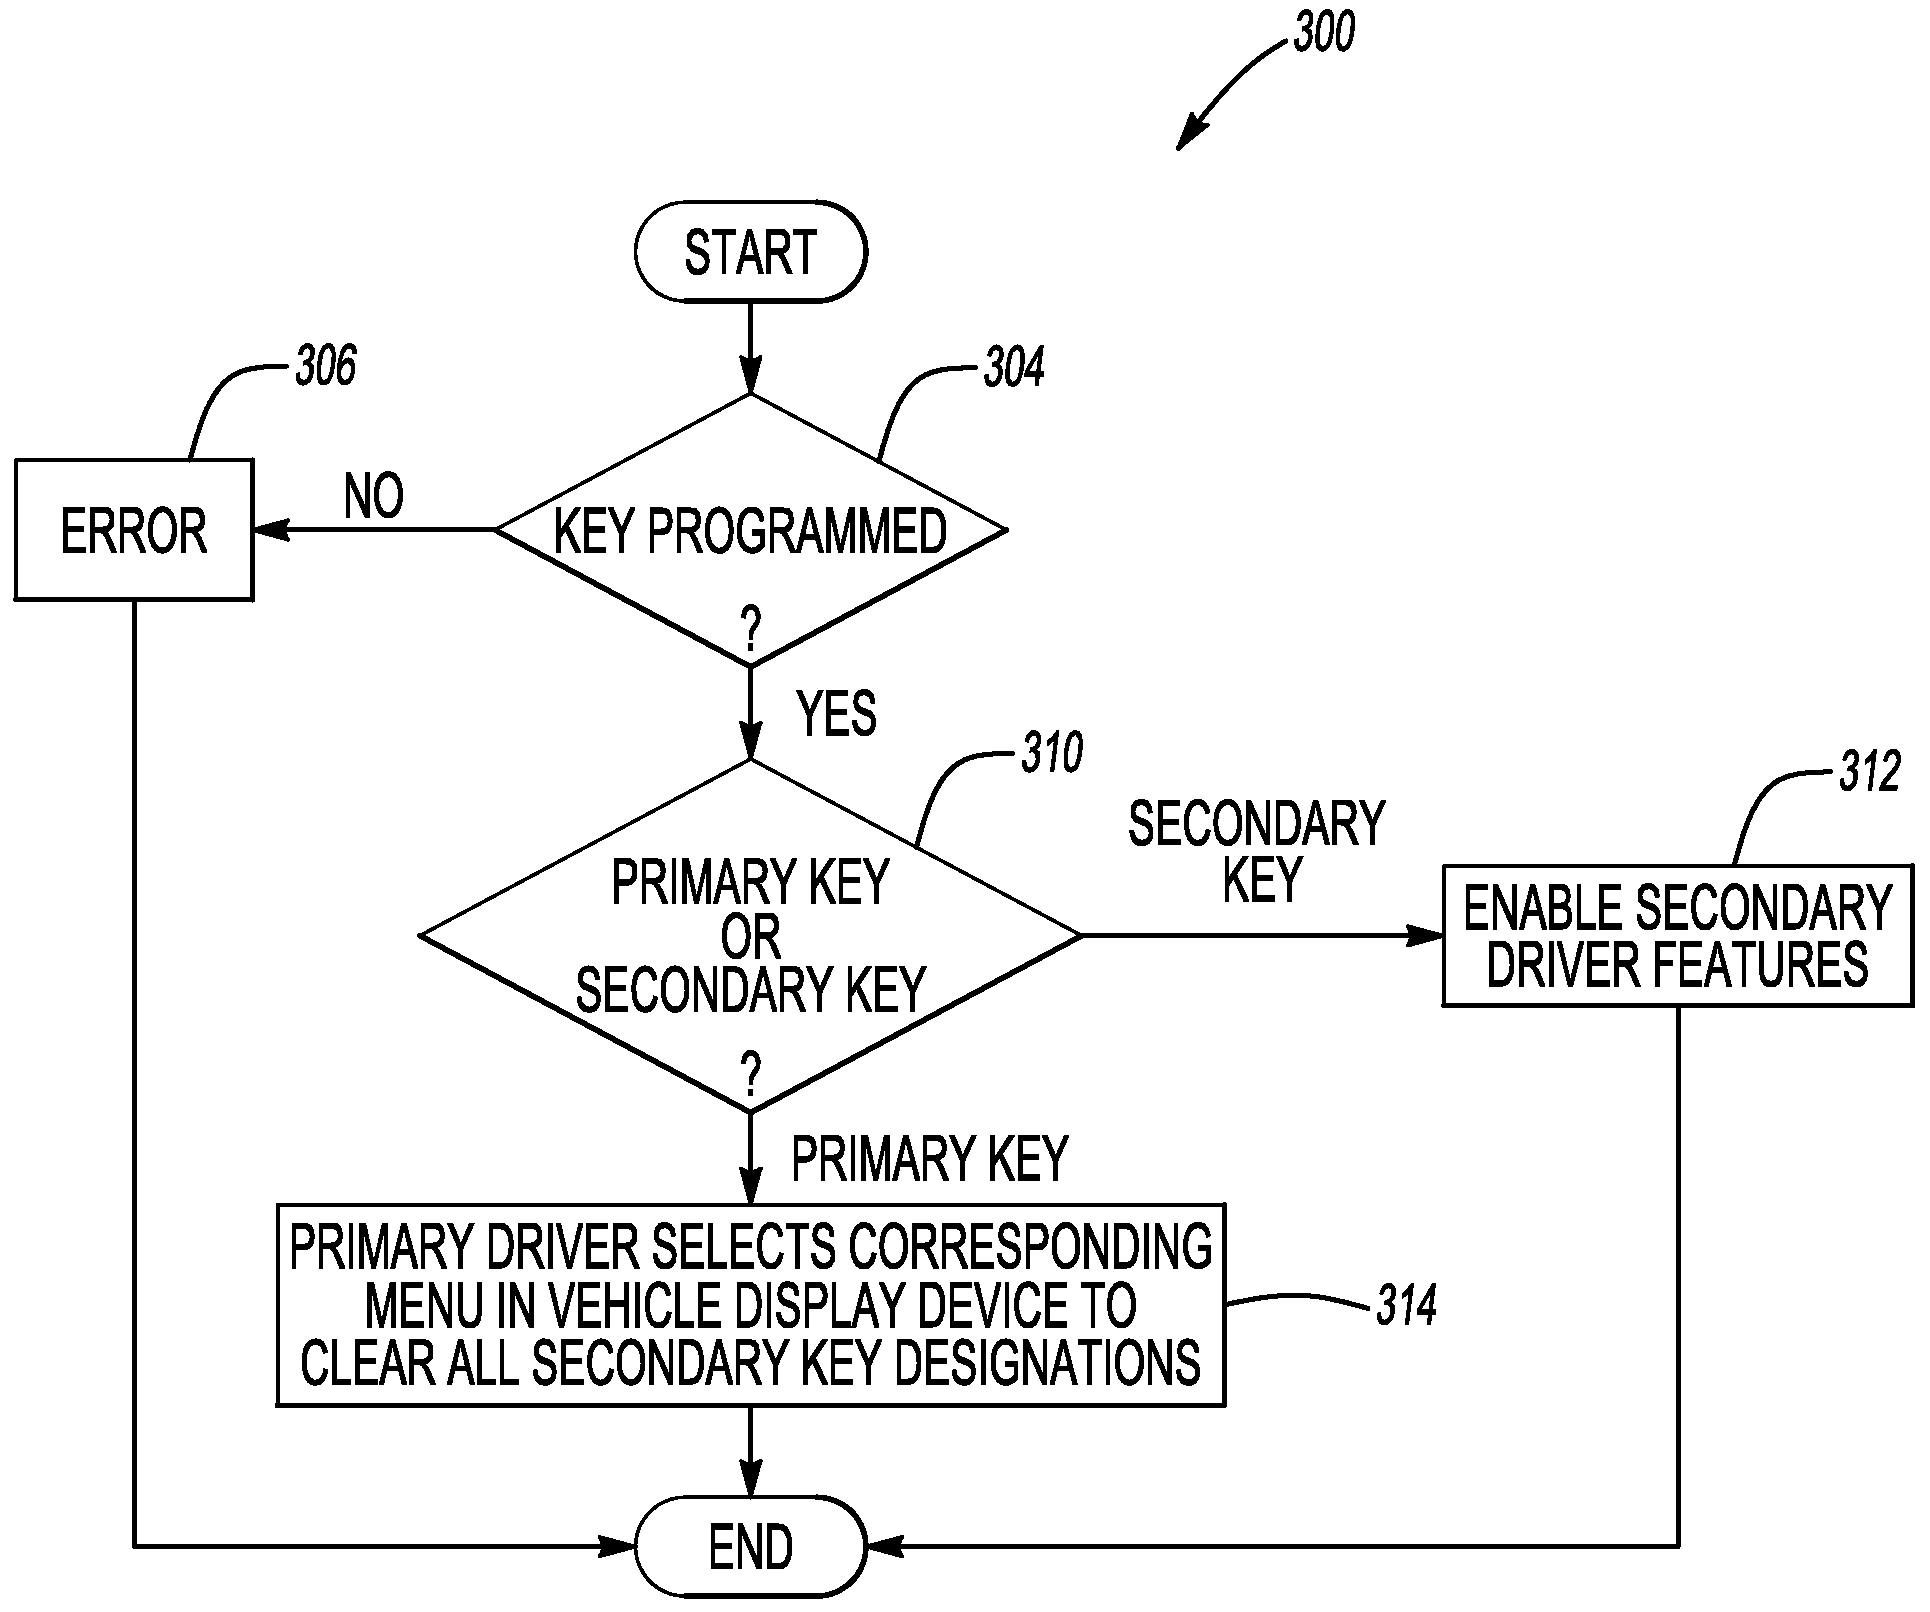 System and method for programming keys to vehicle to establish primary and secondary drivers